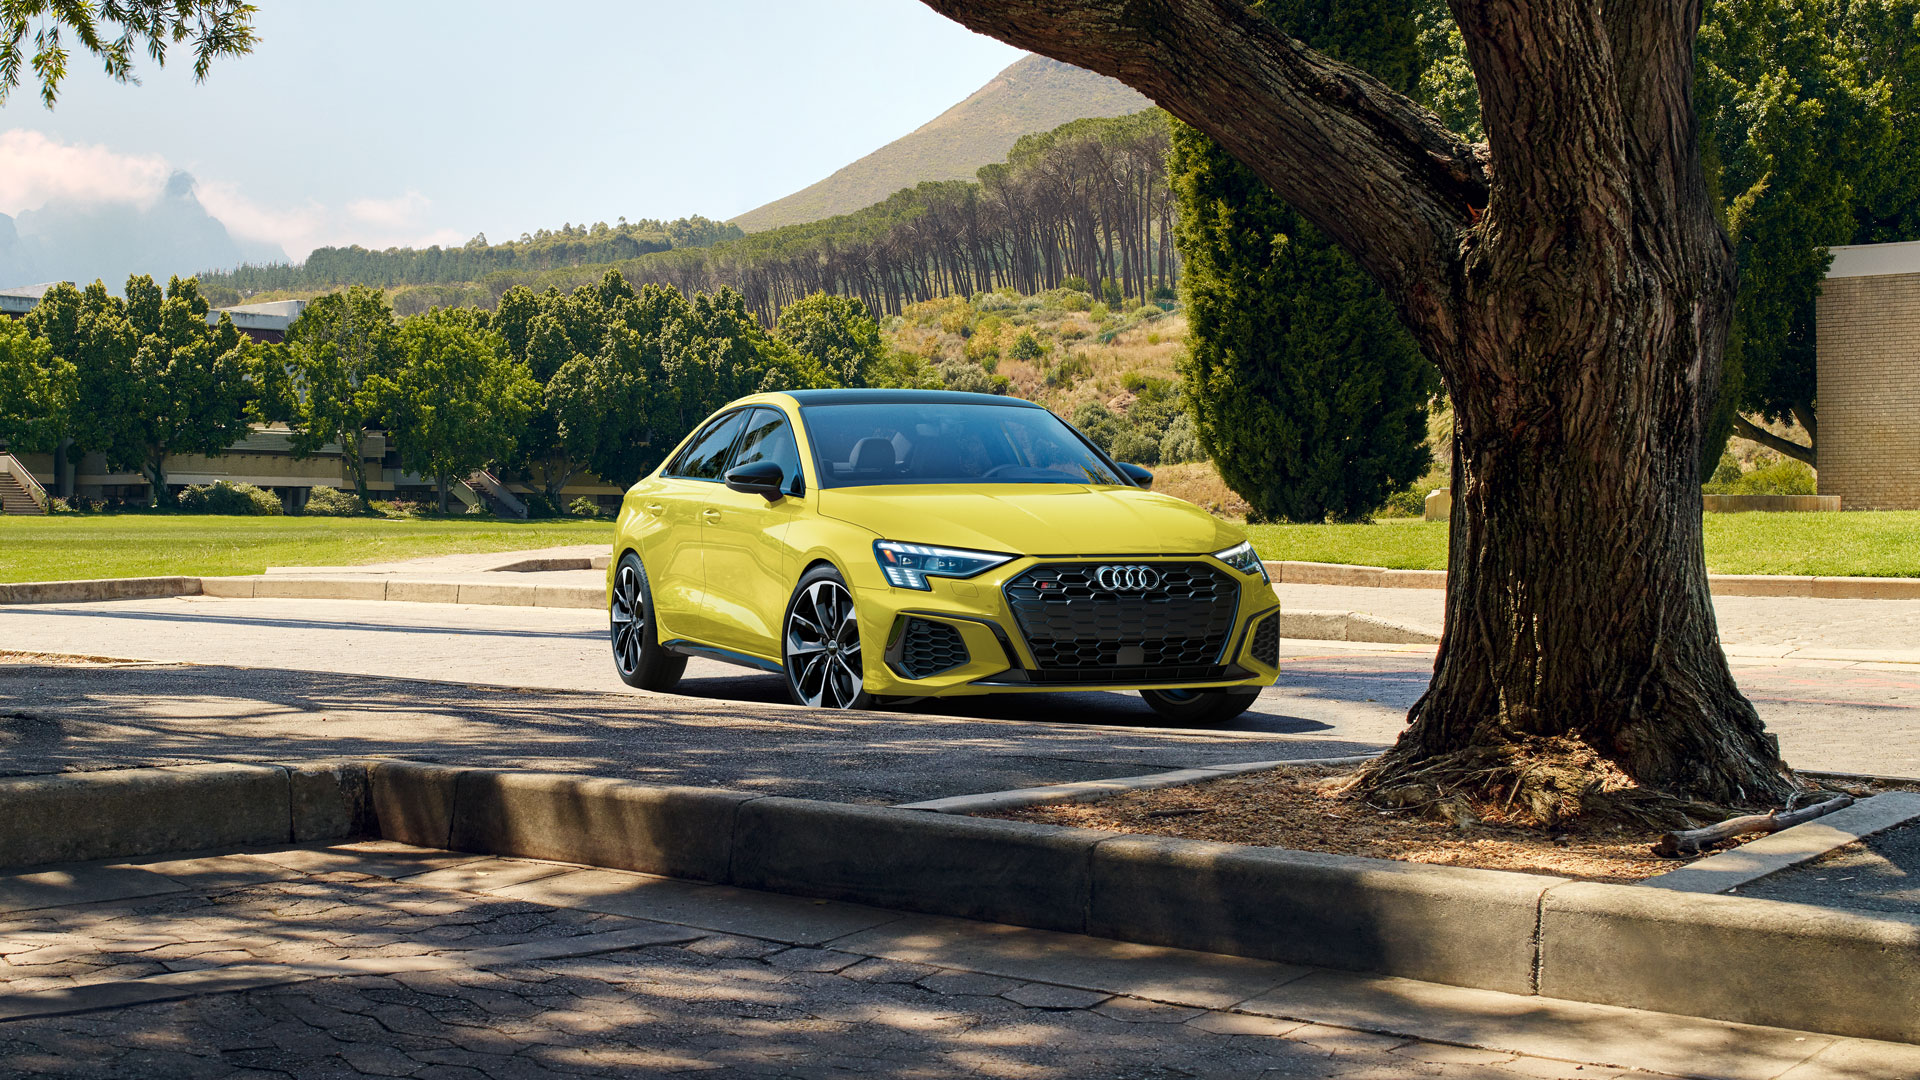 A yellow Audi S3 in a mountain parking lot. 